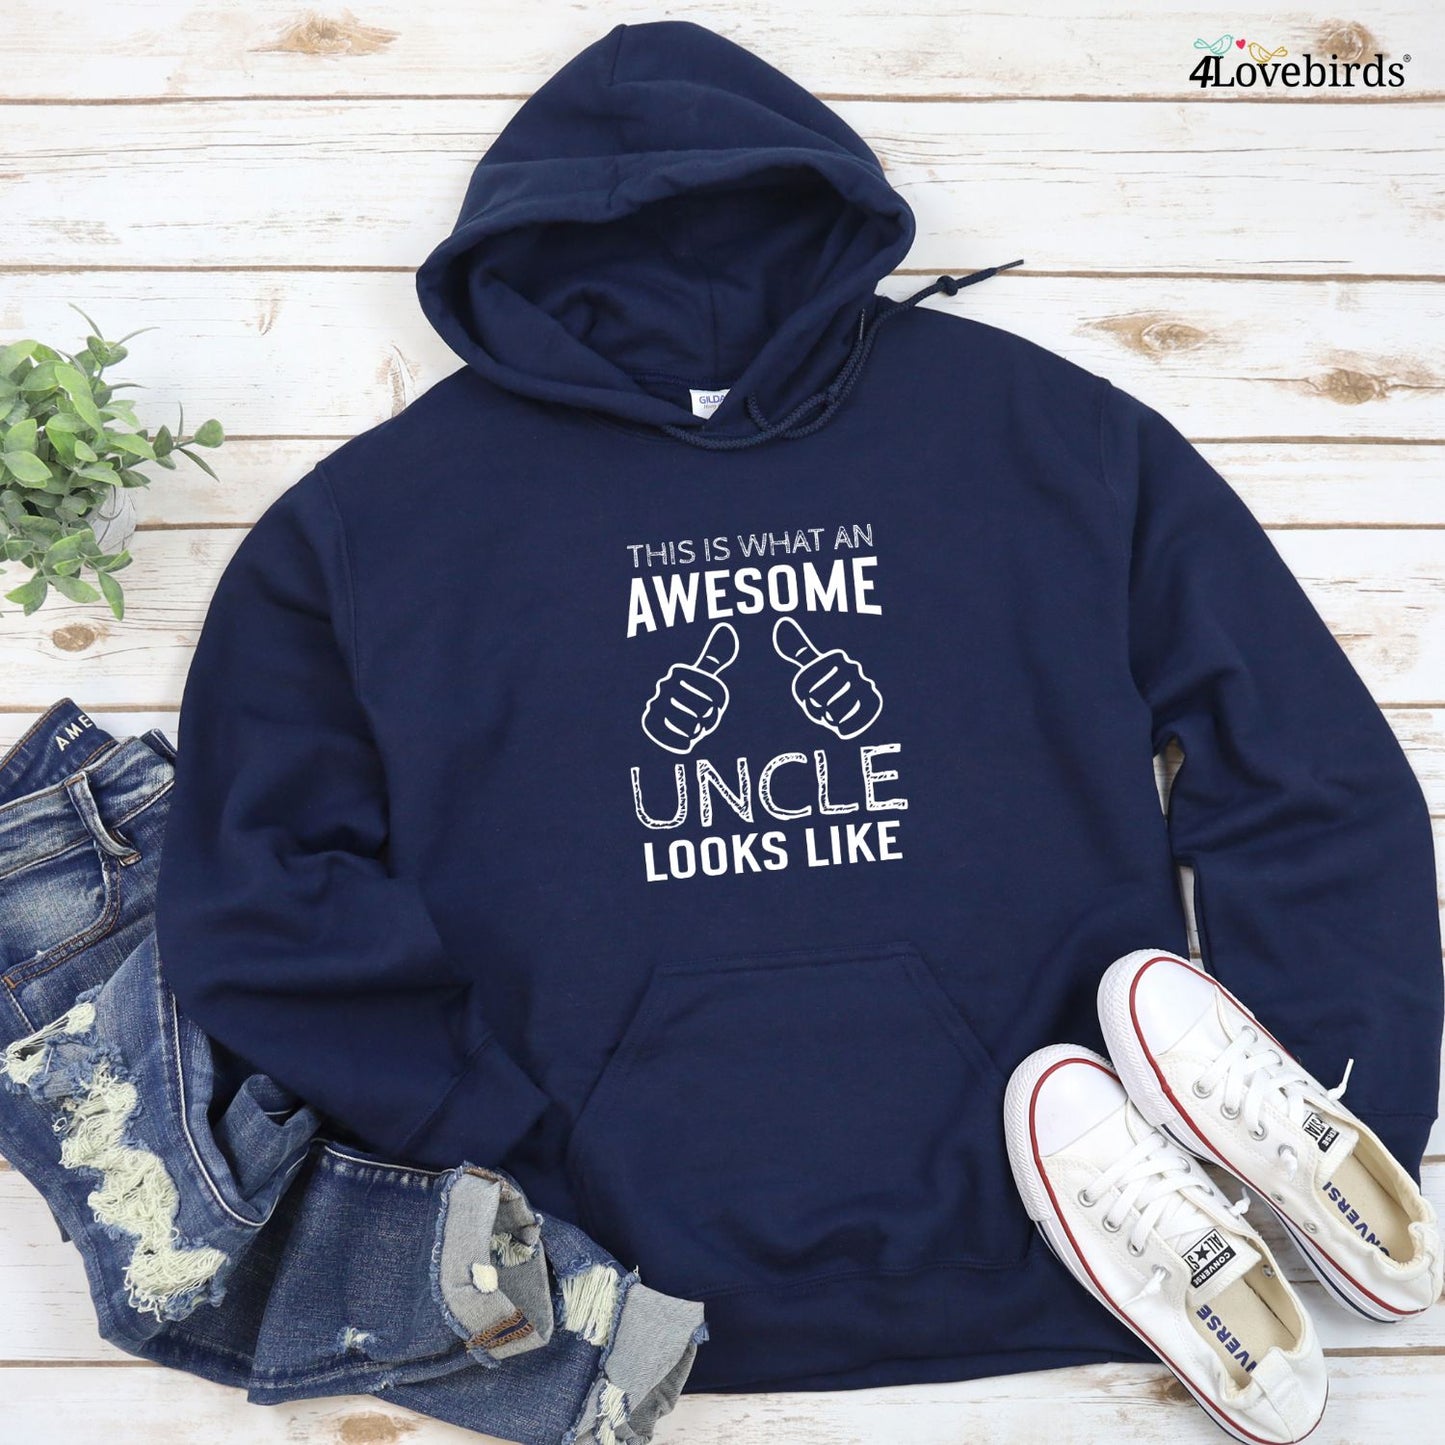 Matching Set Showcasing 'What An Awesome Uncle/Auntie Looks Like', Ideal Gift for Relatives.